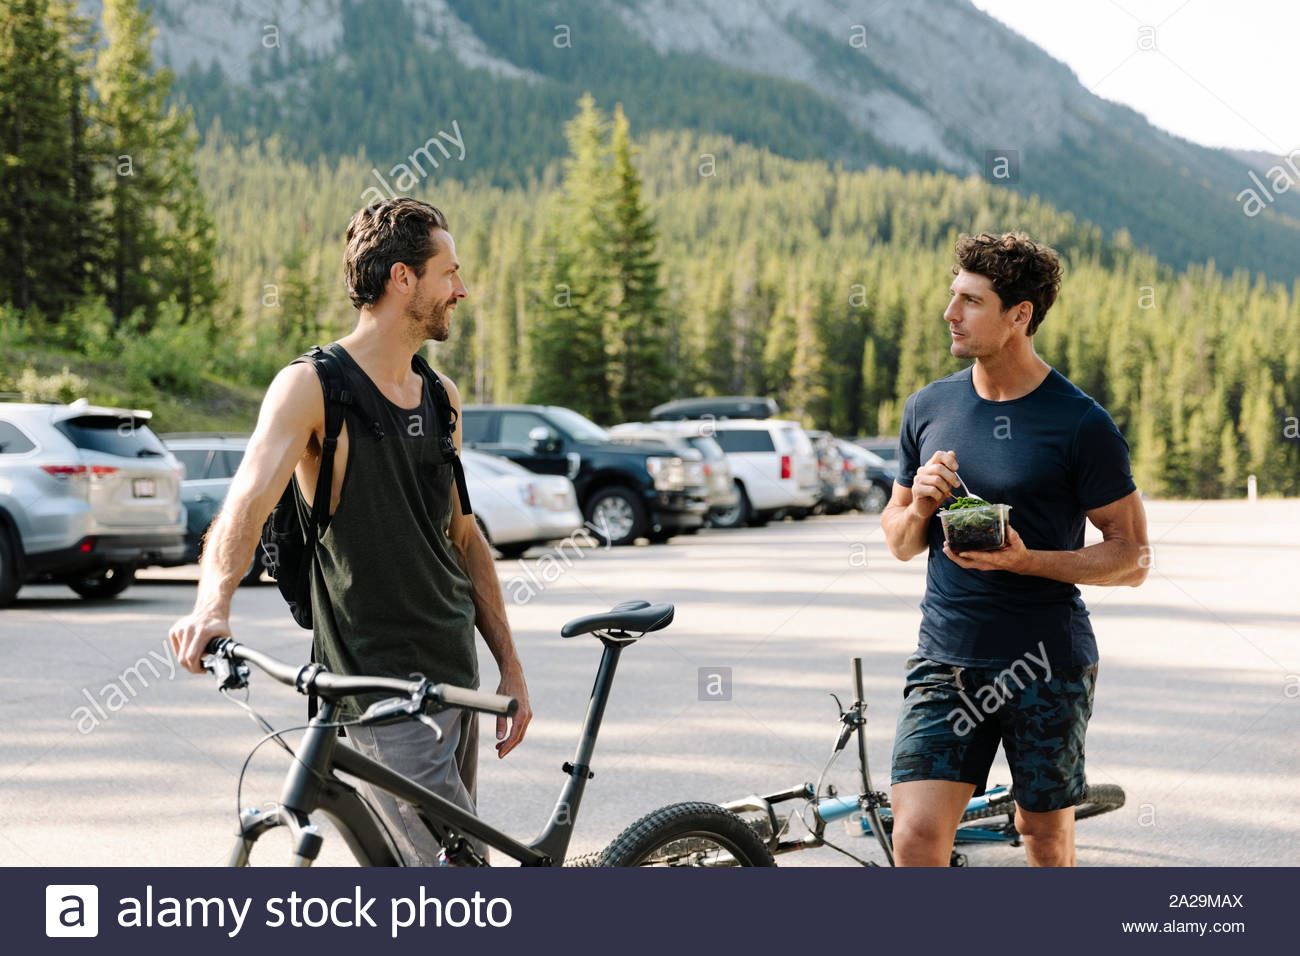 Male mountain biker friends talking and eating in parking lot Stock Photo